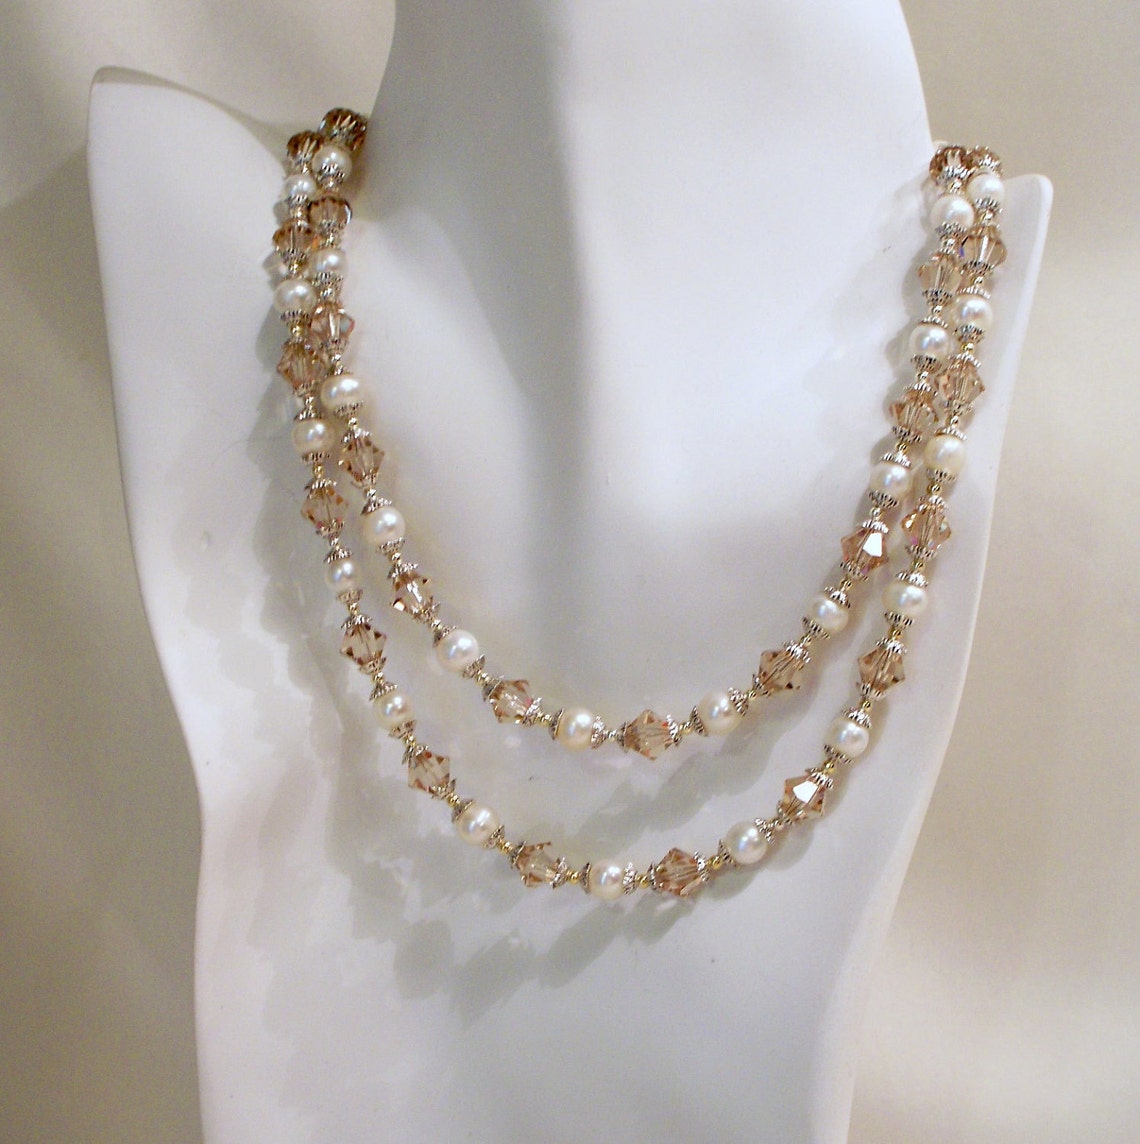 Ceylon Topaz Crystals and Pearl Double Strand Necklace - Etsy